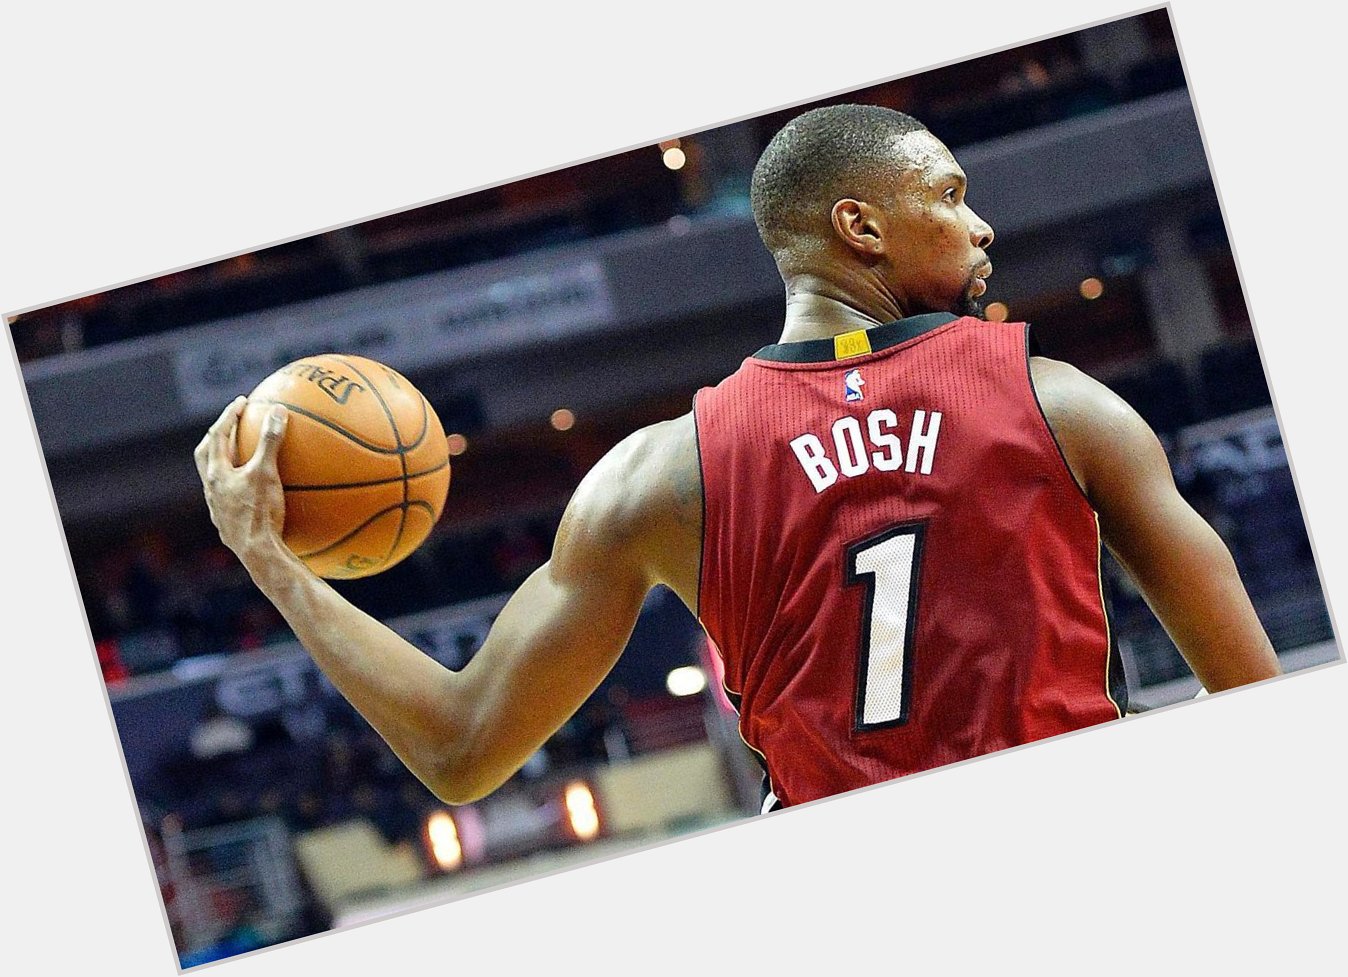 Happy Birthday to the most underrated player in NBA history, Chris Bosh 